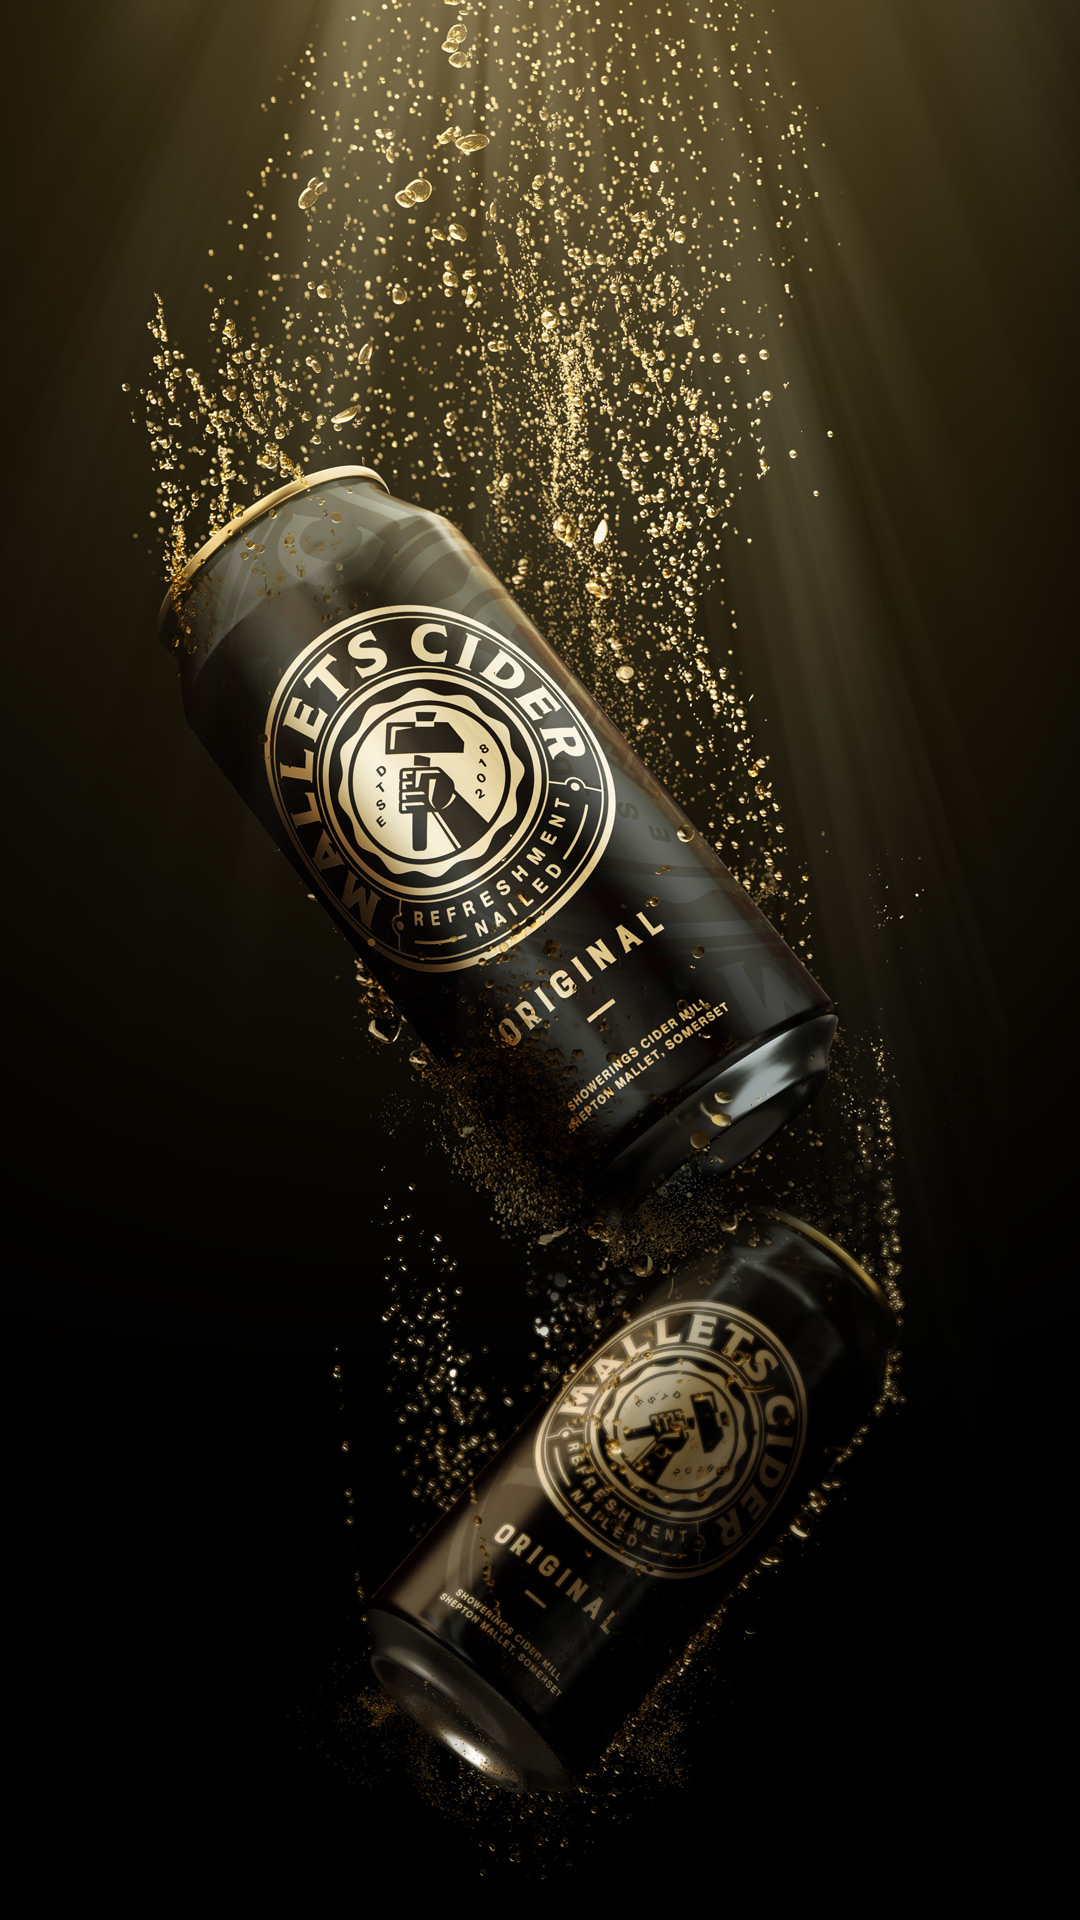 mallets-cider-3d-can-renders-04